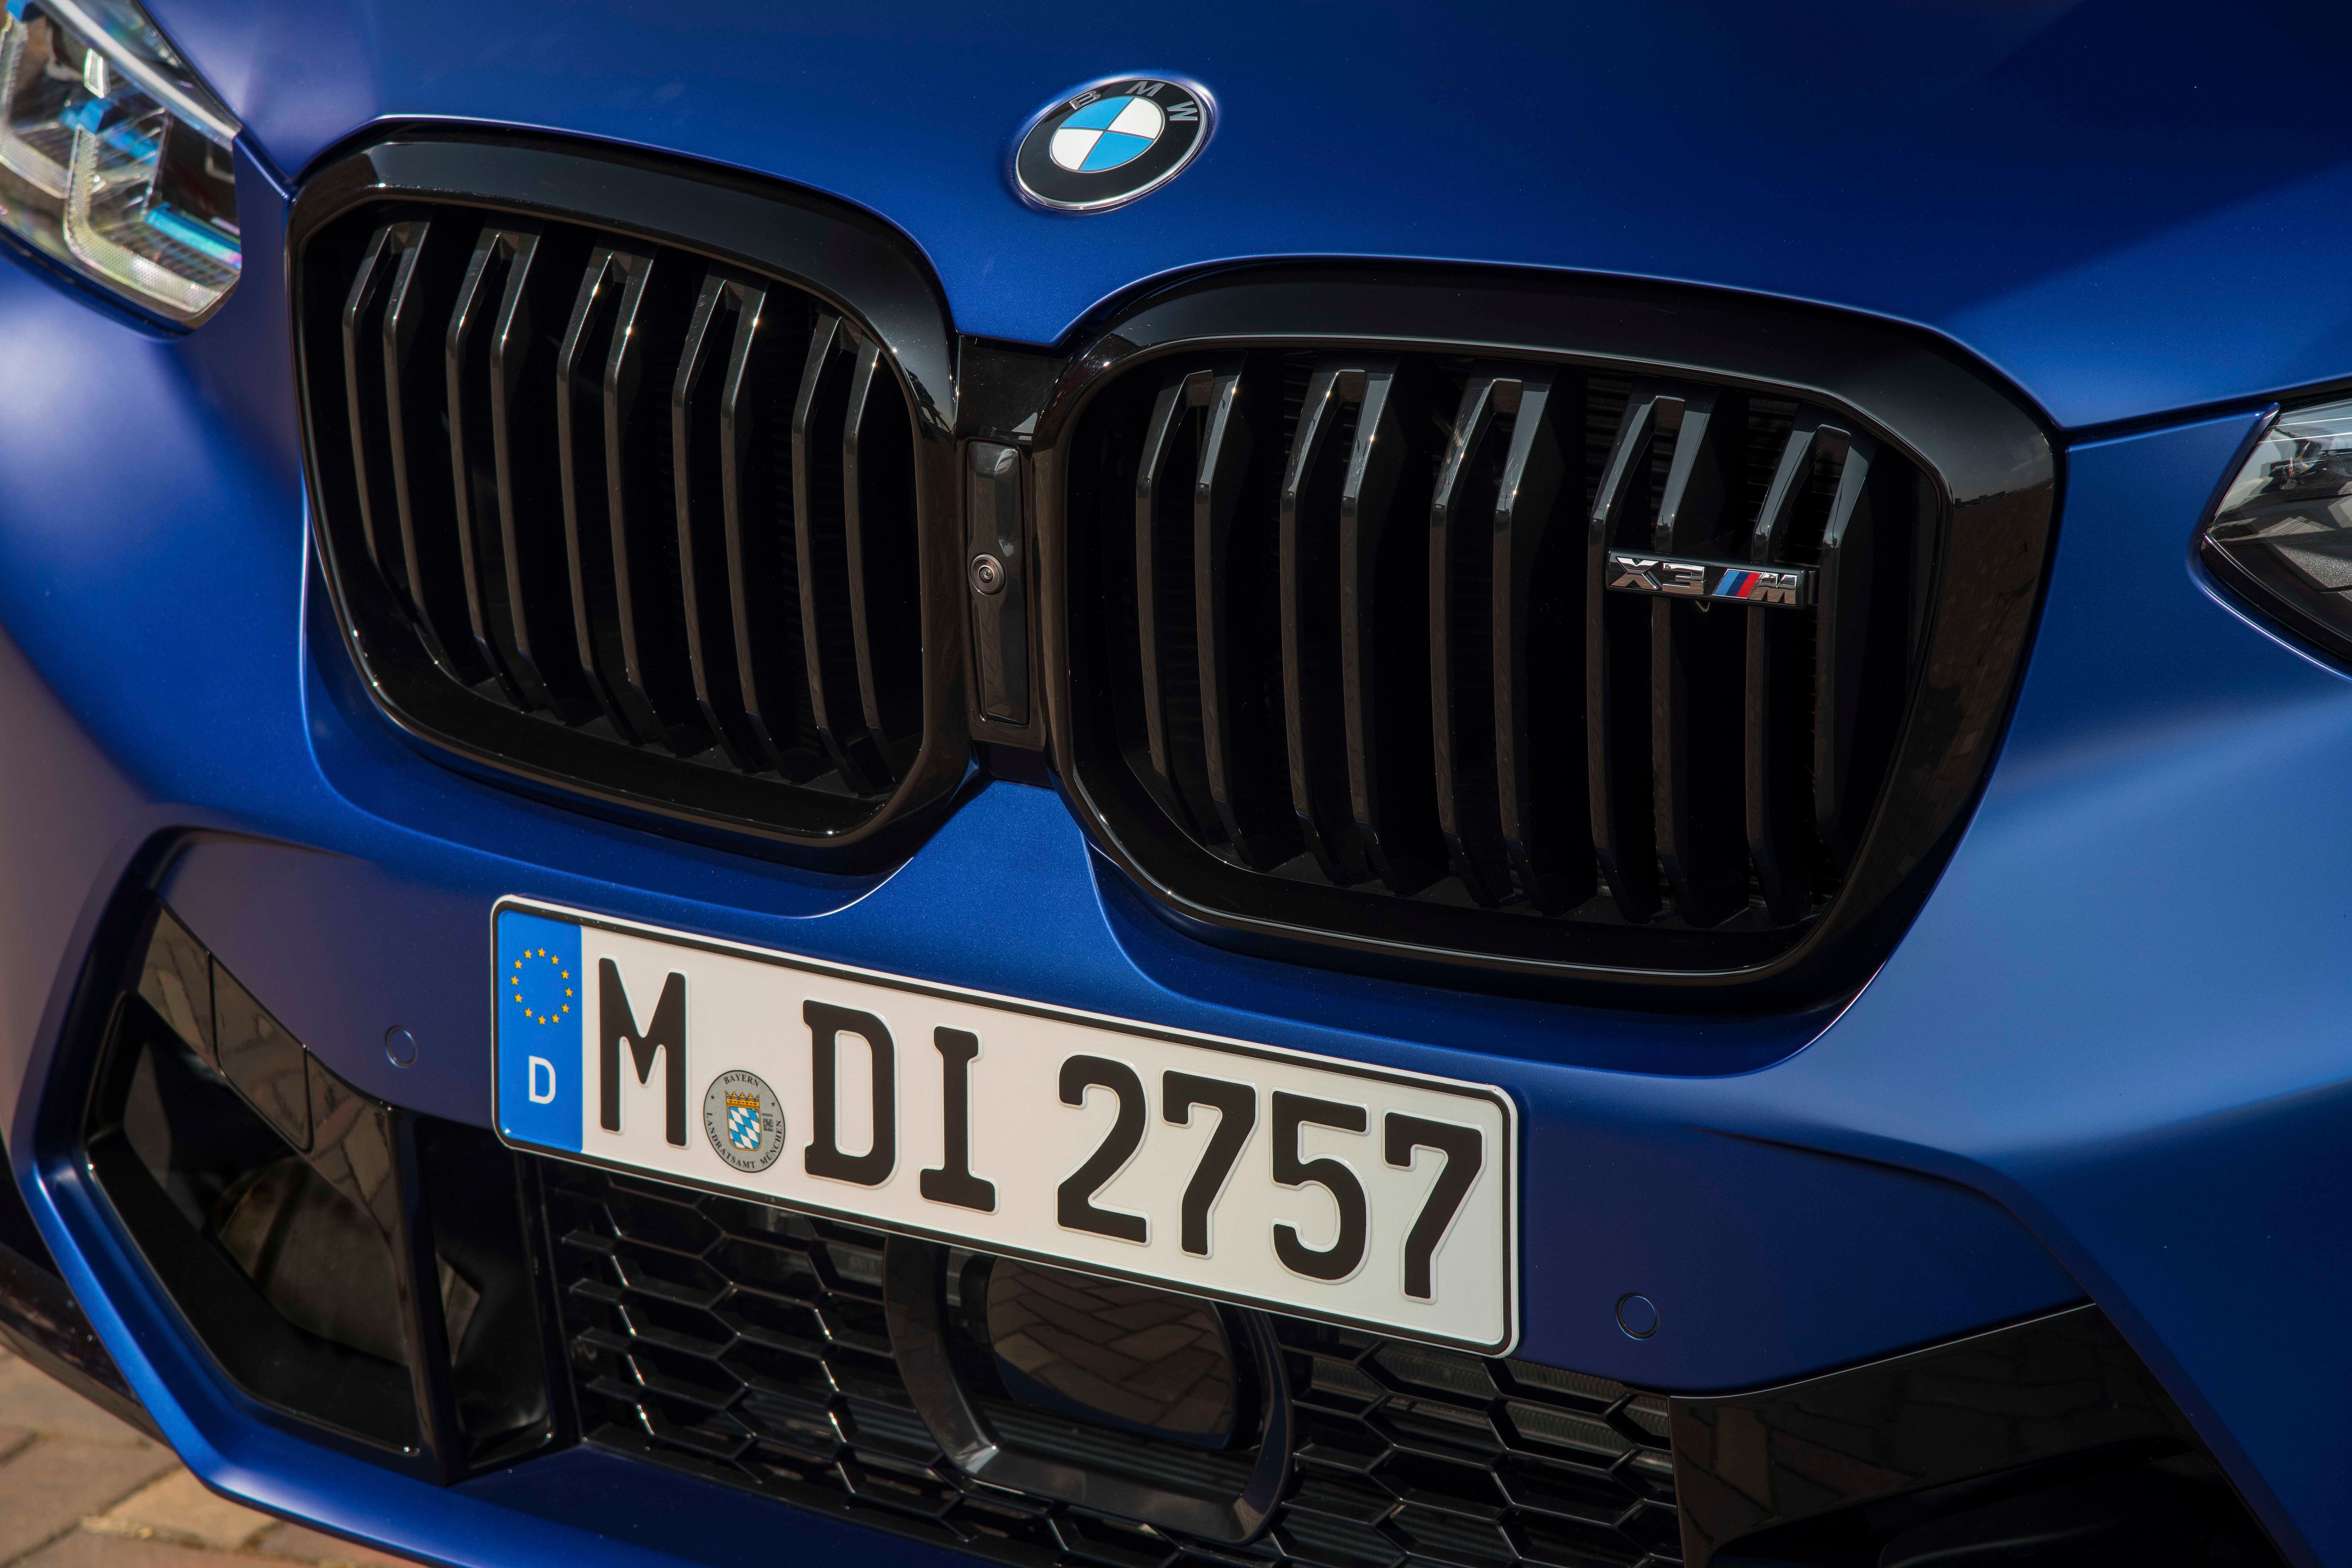 2022 BMW X3 M Competition